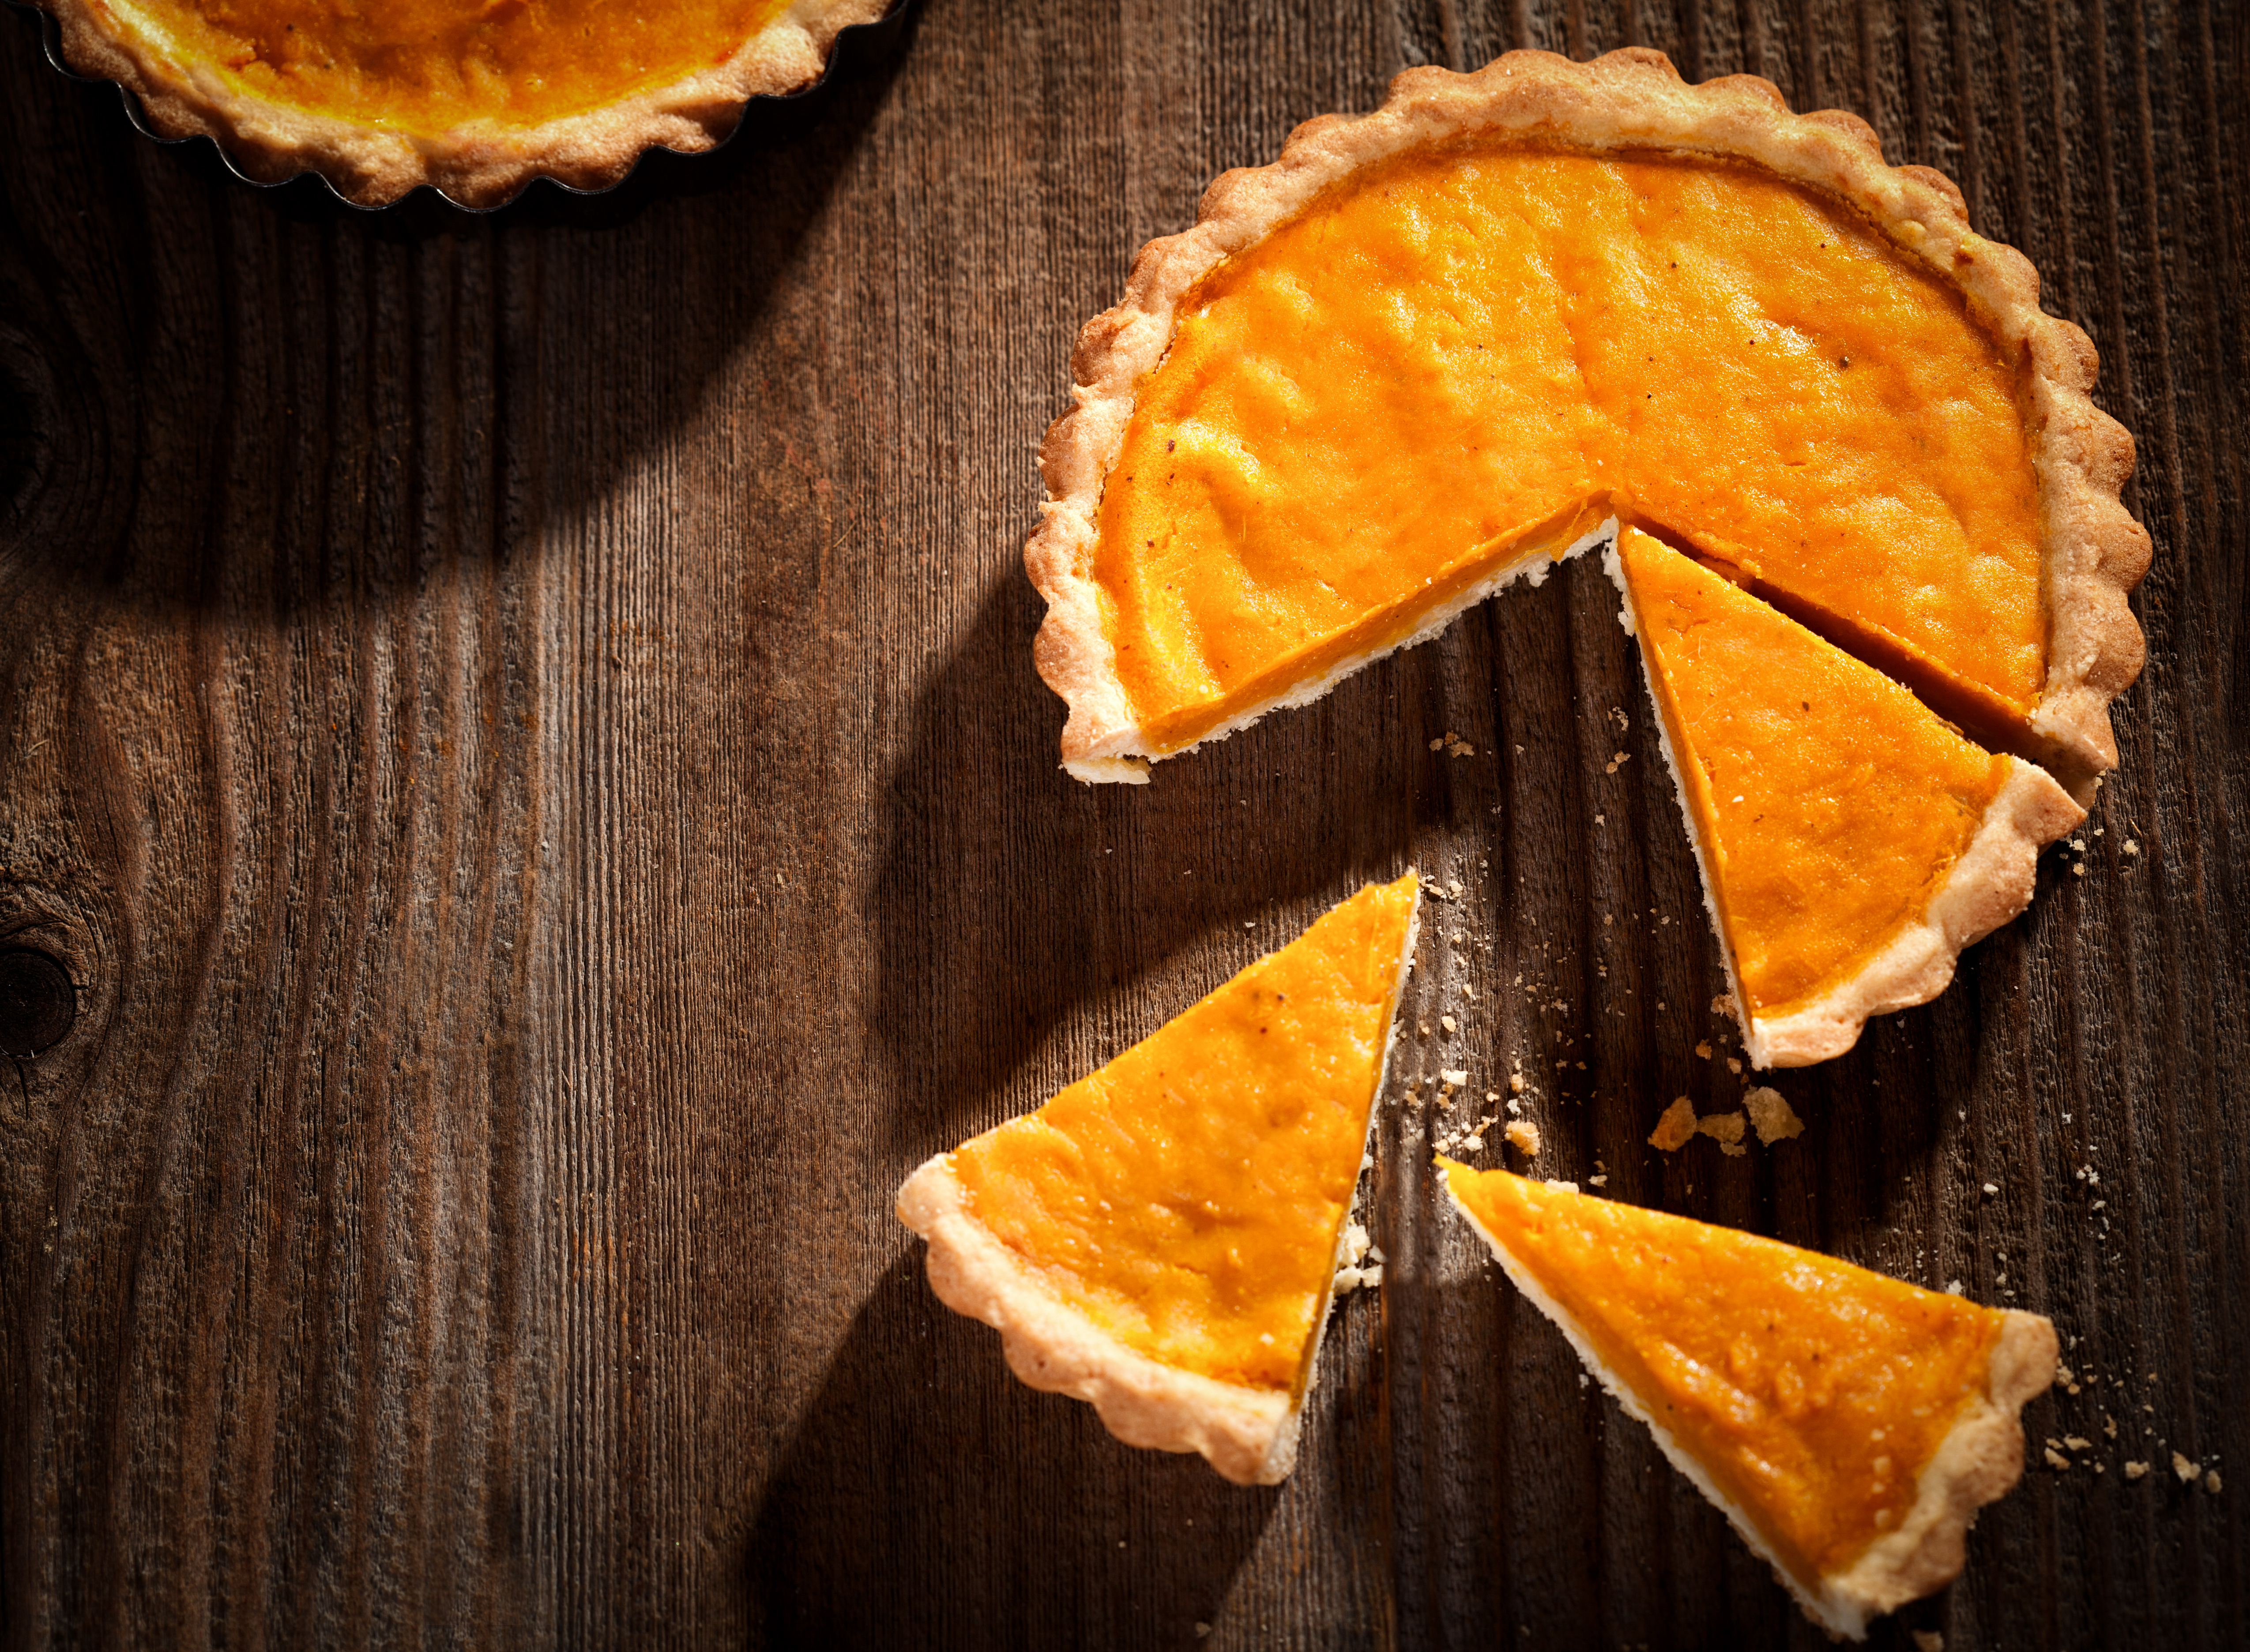 Pumpkin pie - delicious dessert or a mouth-watering main course?